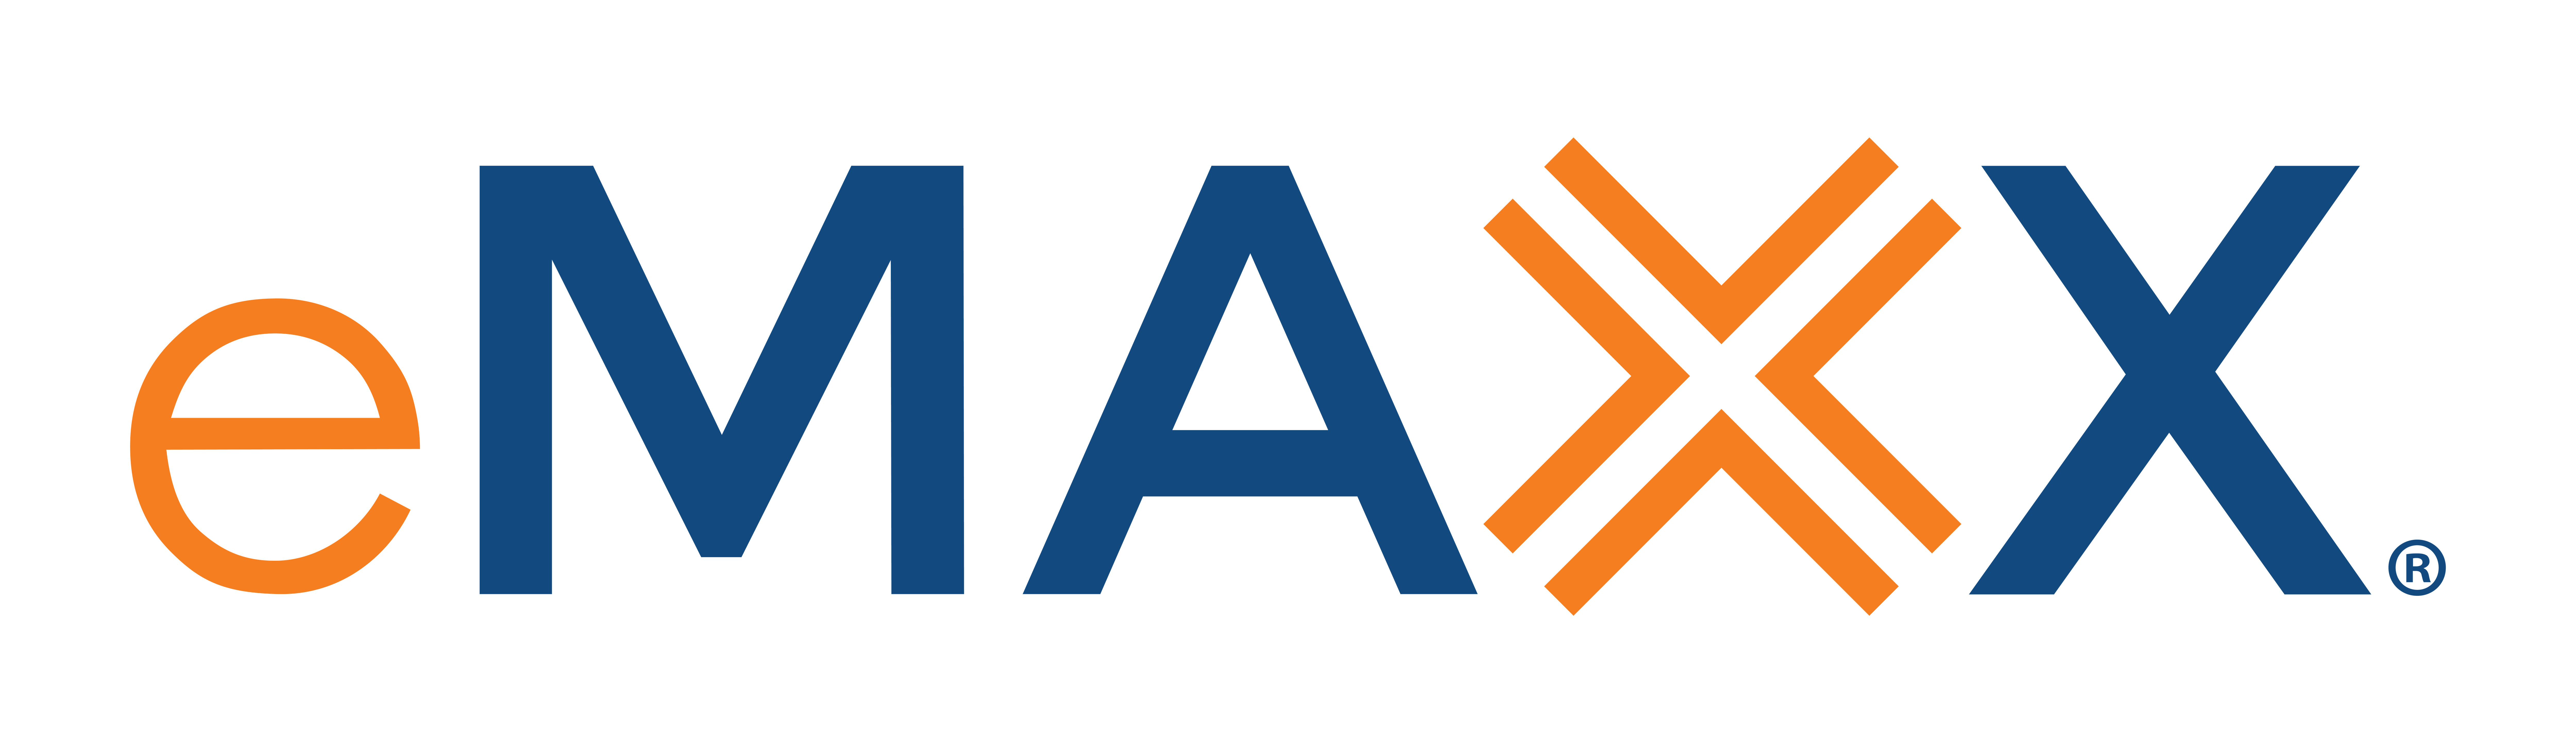 Insurtech eMaxx Launches Customer Centric Platform for Variable Cost Captive Programs